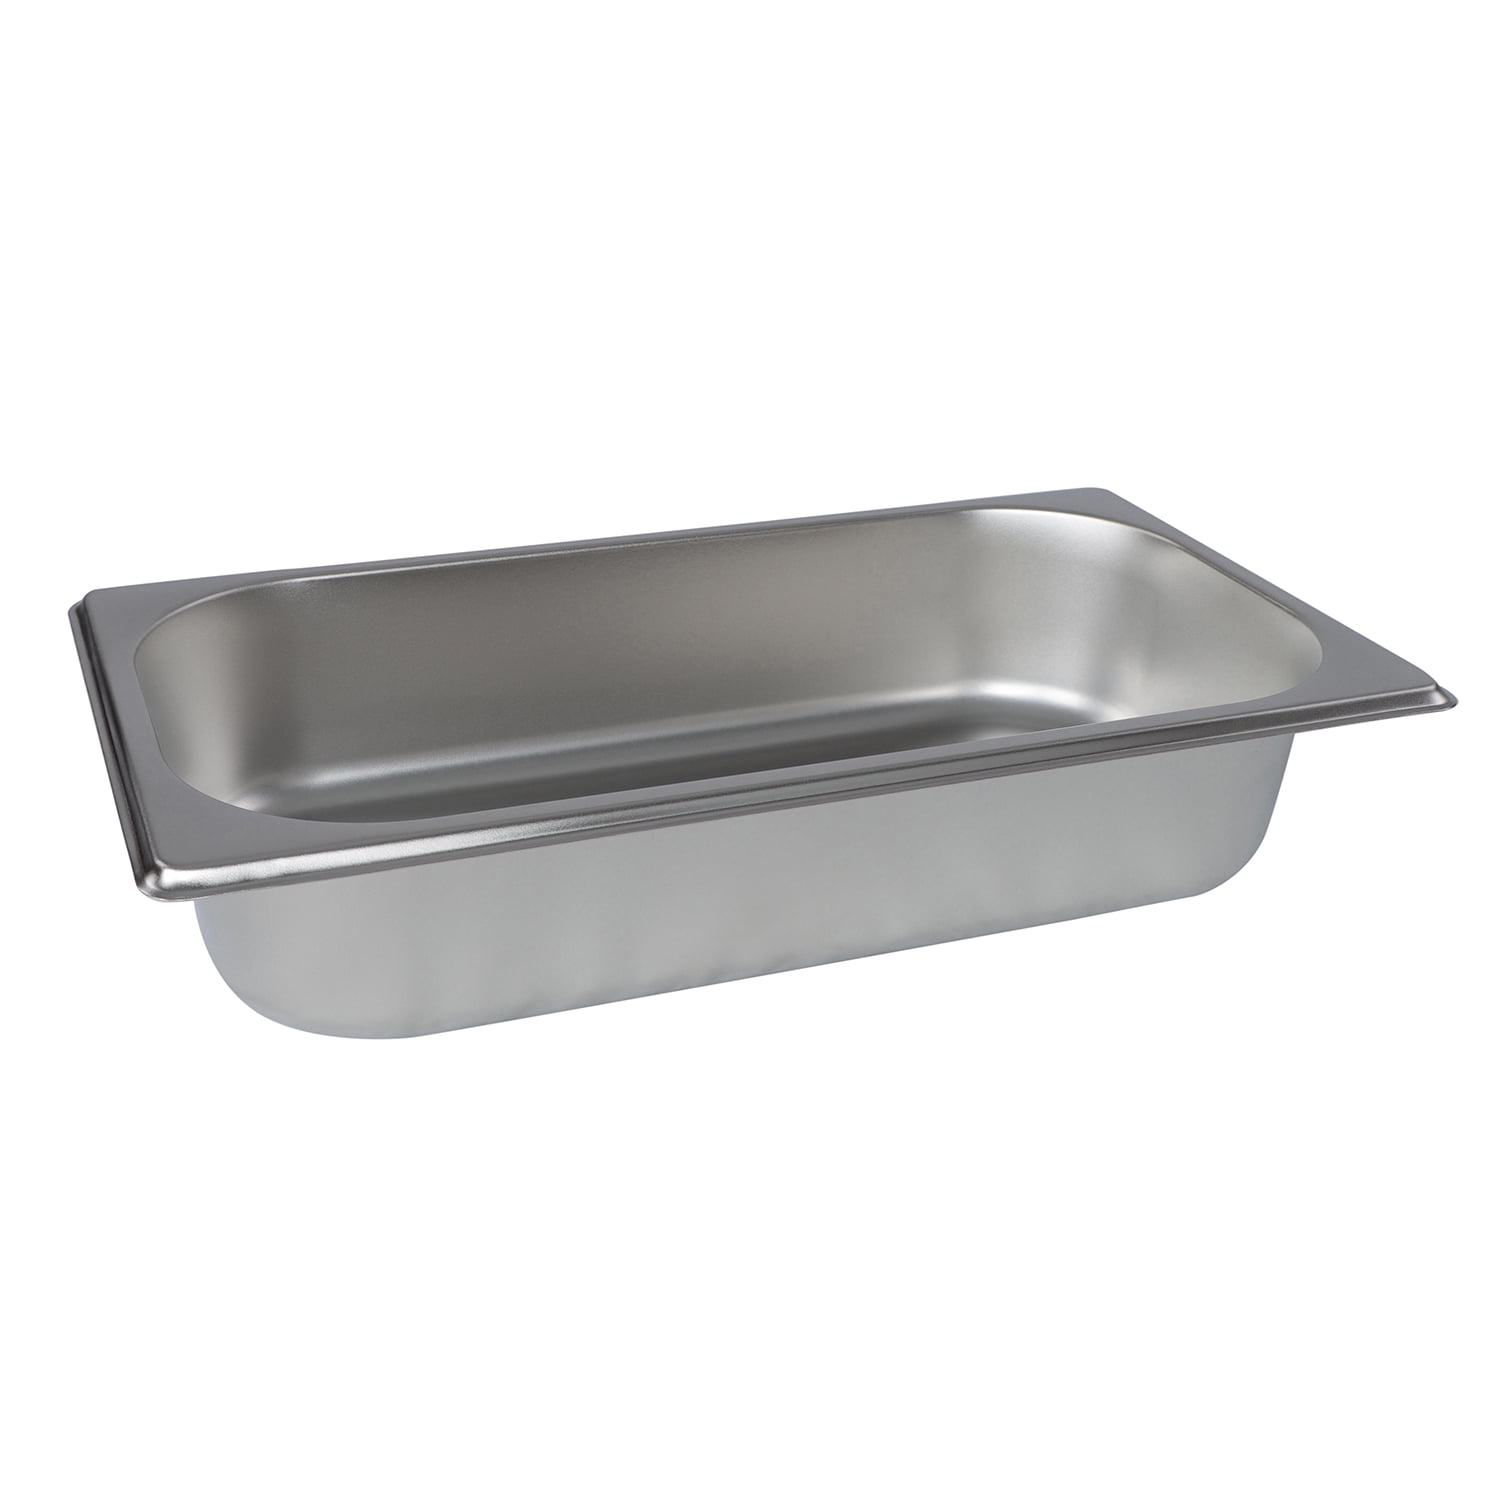 Steaming Oven Food Grade Stainless Steel Baking Pan 325*264*25 Commercial  Steaming Pan Baking Tray Tray GN2/3 - AliExpress